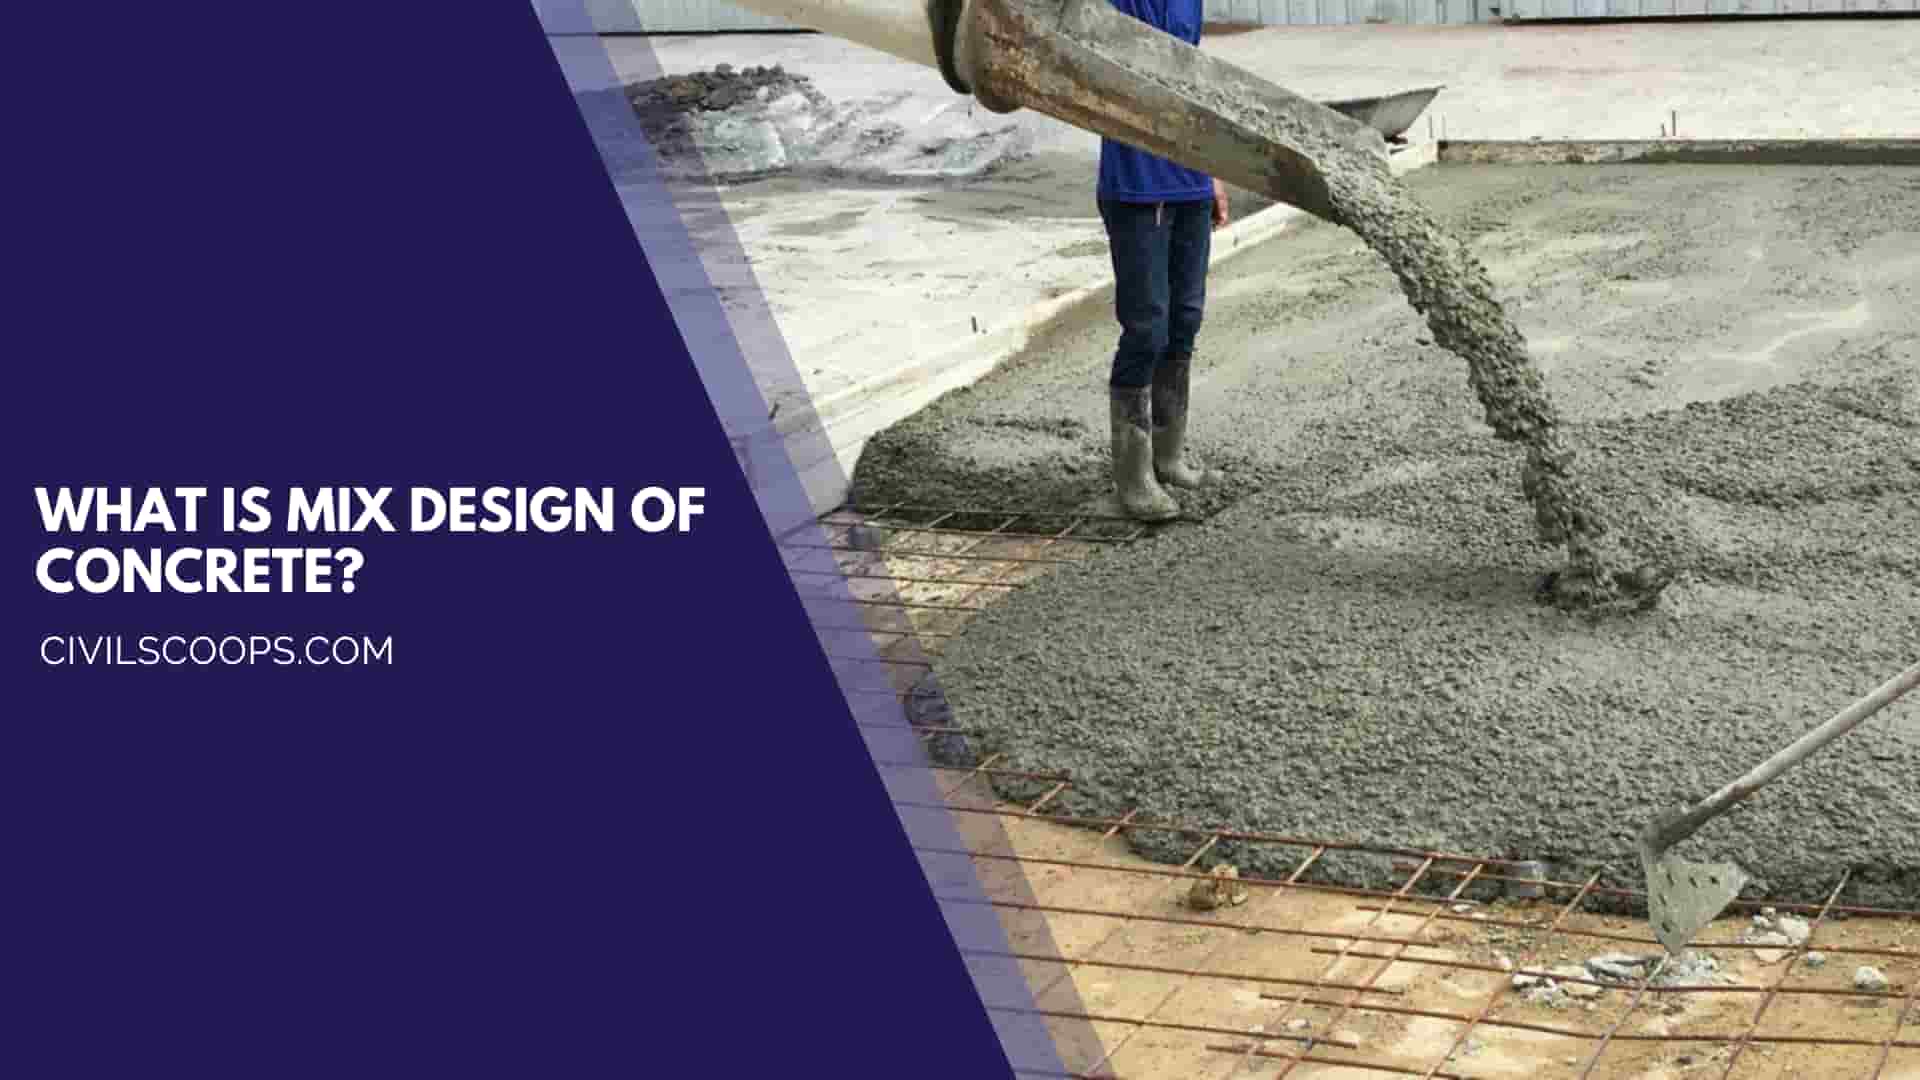 What Is Mix Design of Concrete